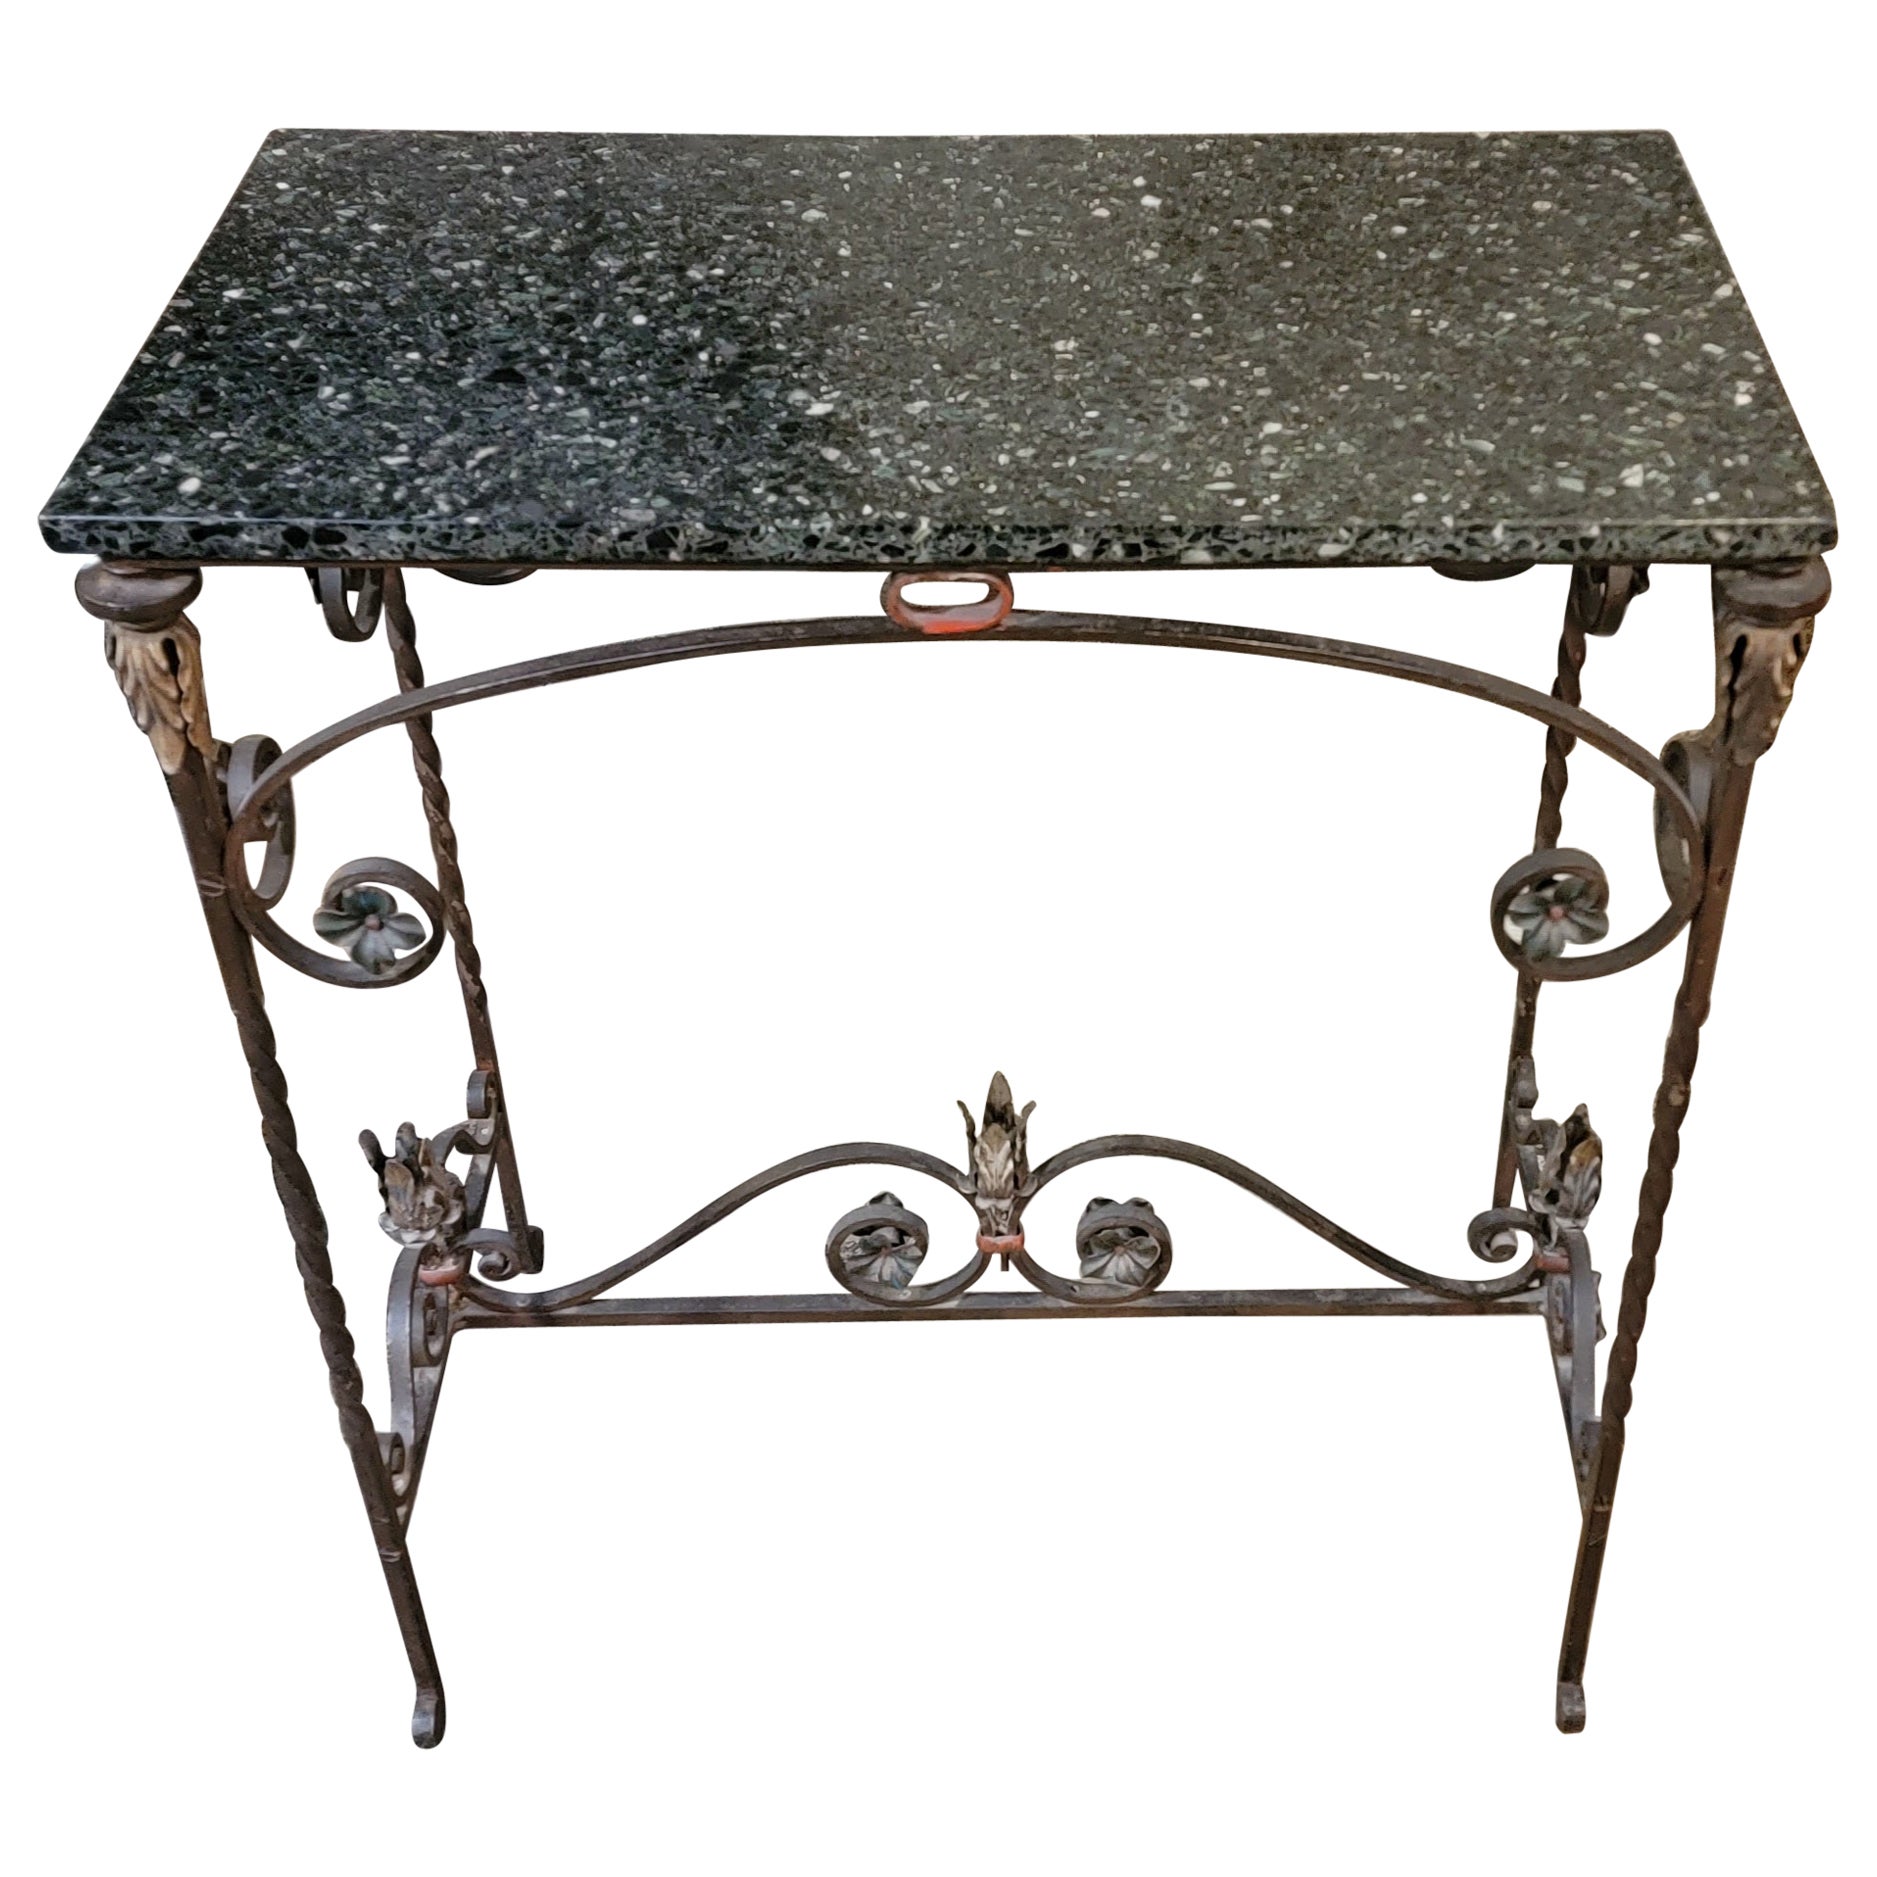 1920's Wrought Iron Marble Top Console Table